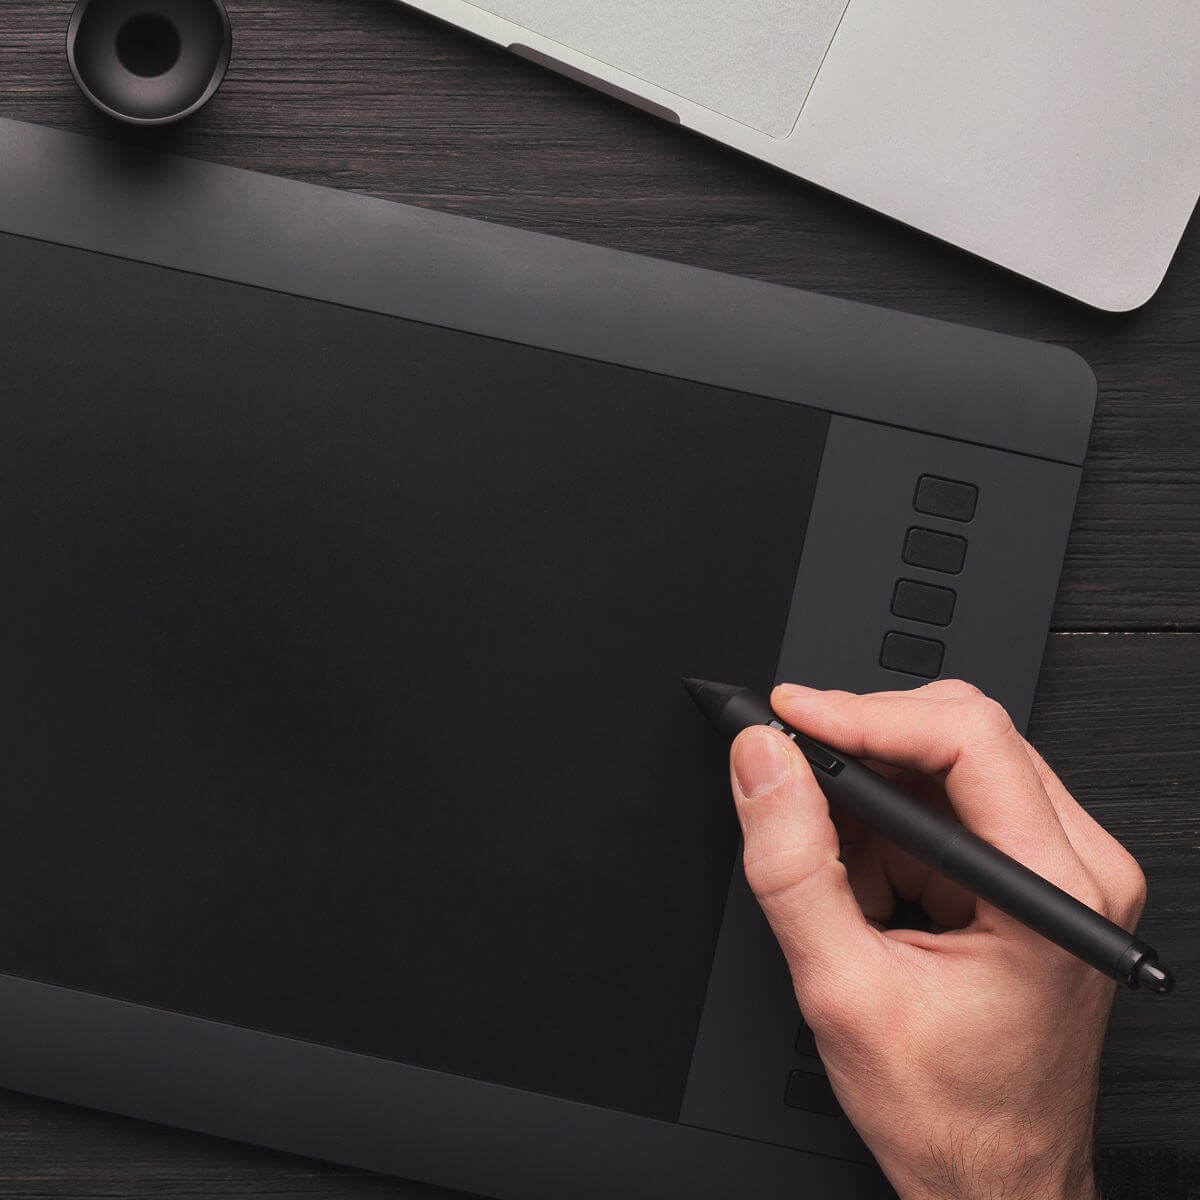 6 best Windows 10/11 drawing tablets to buy